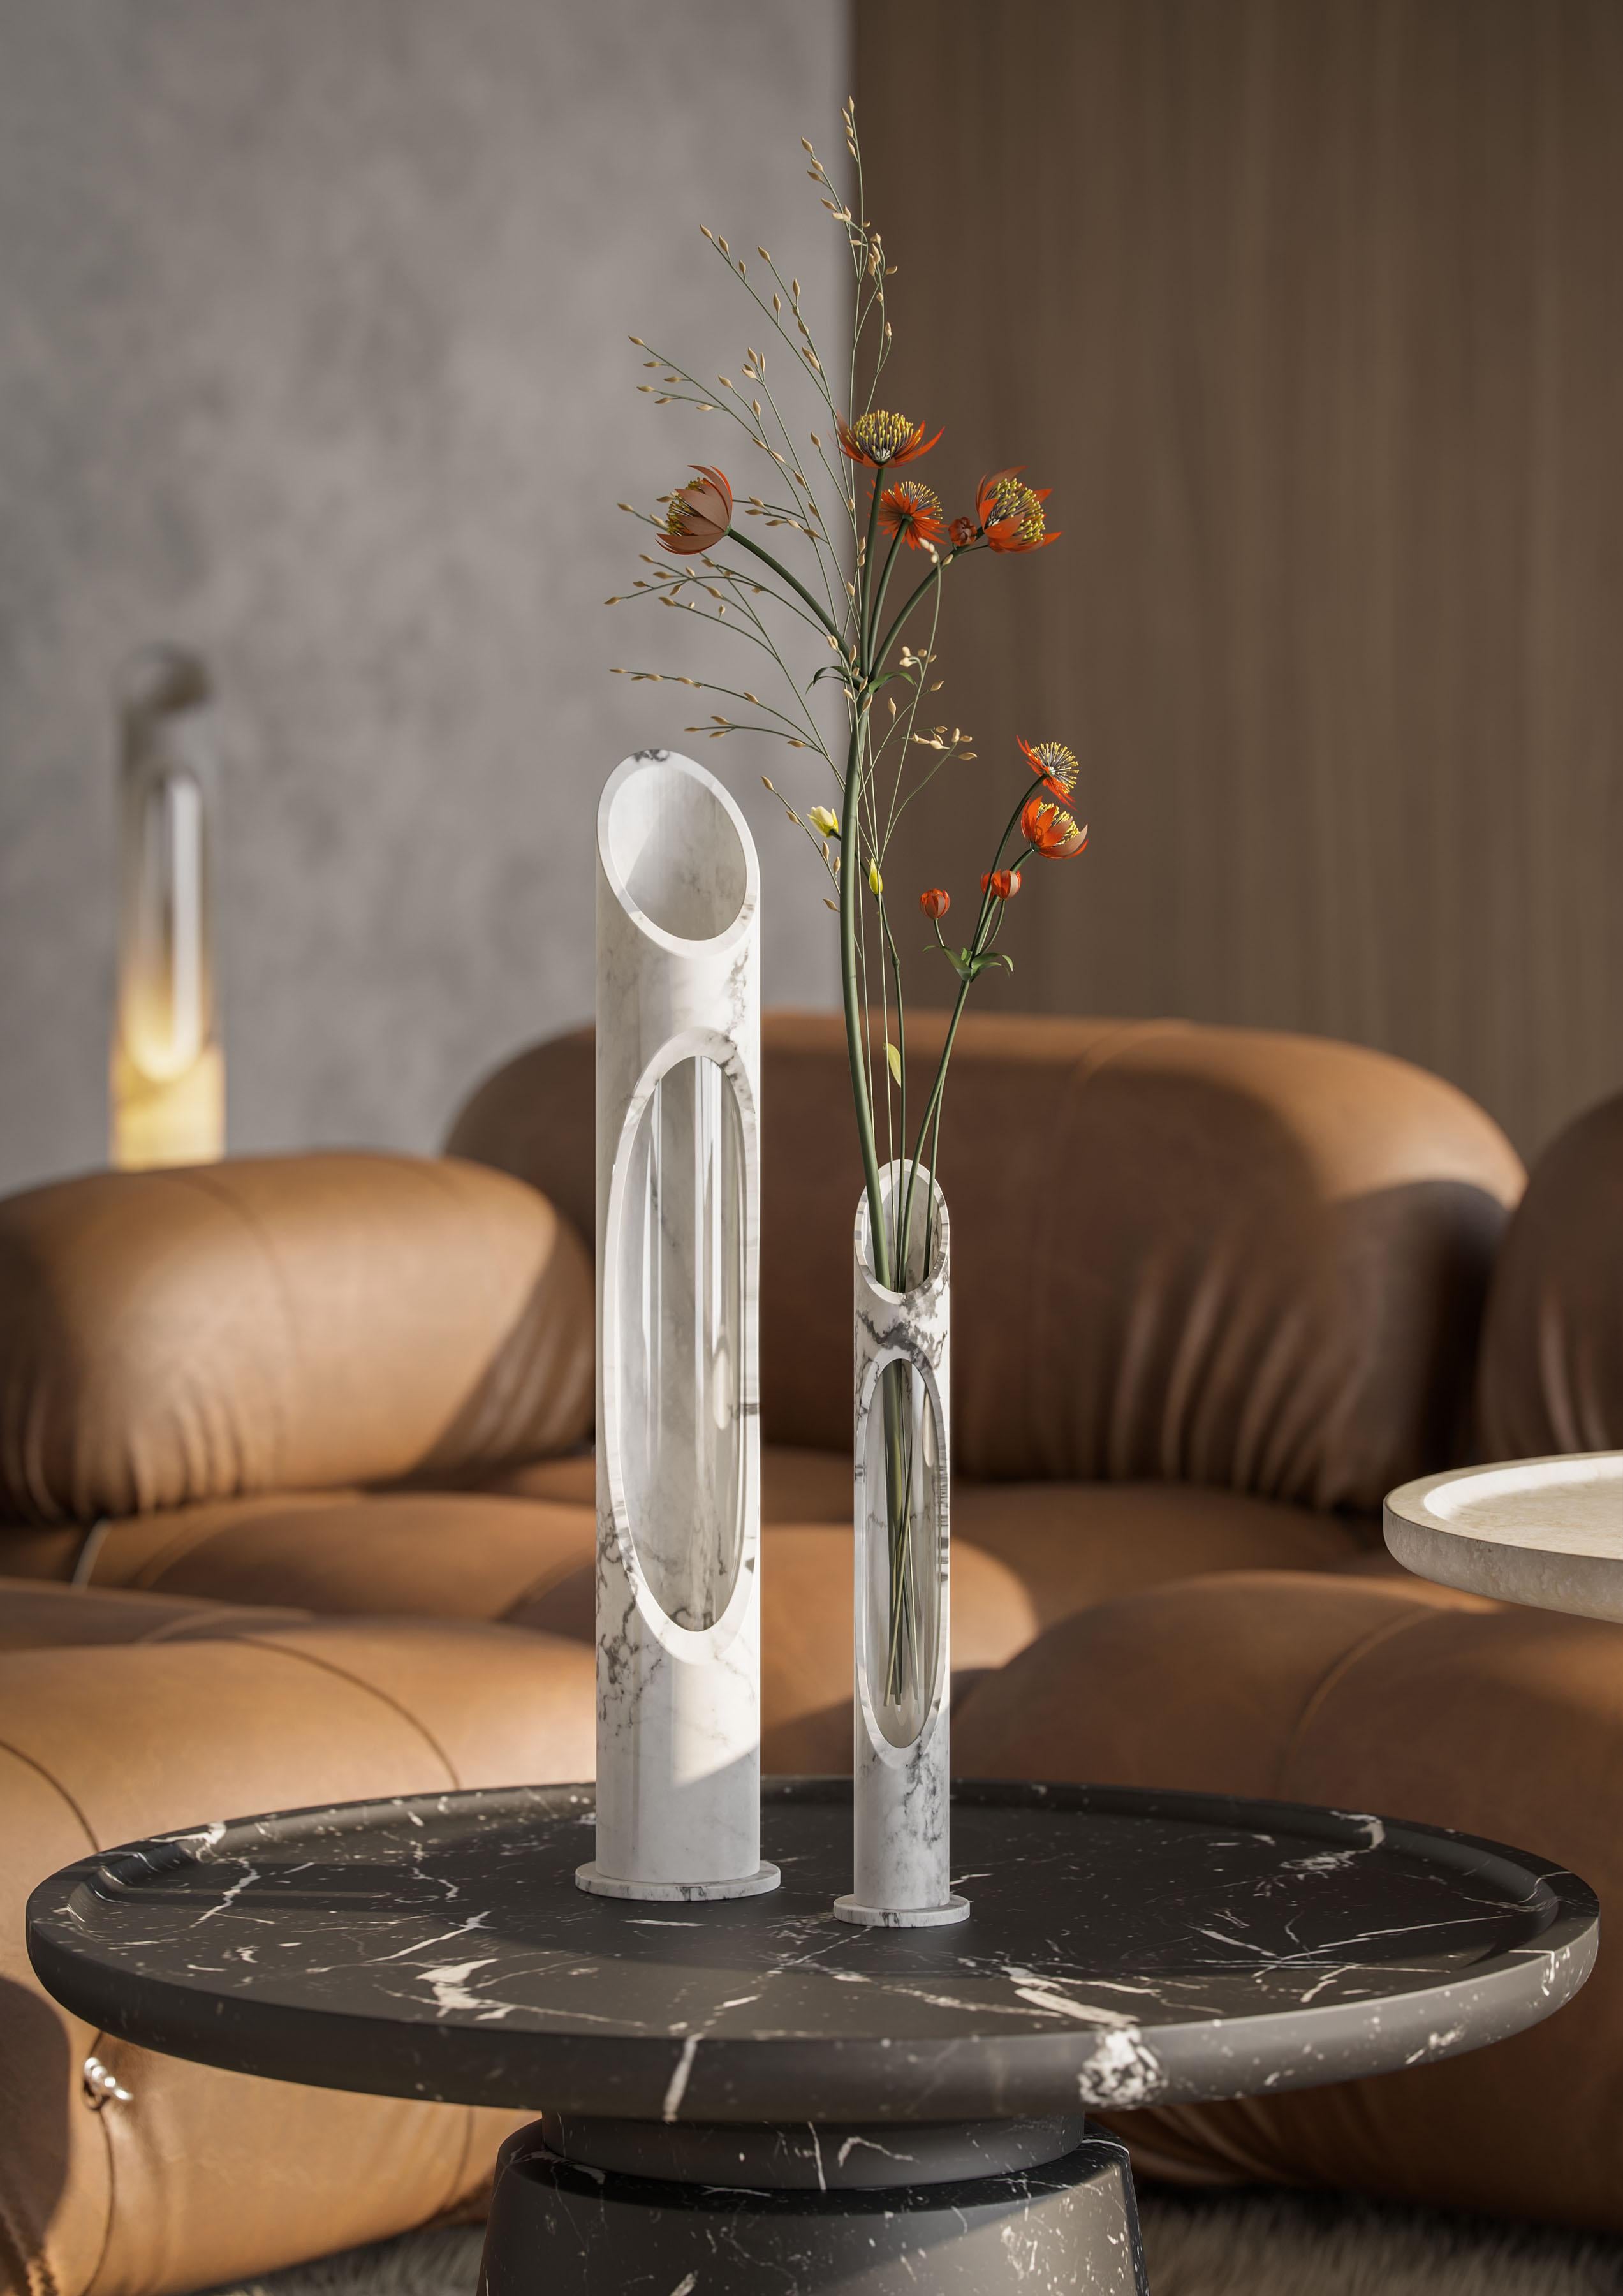 Vase Sin White Arabescato marble, designed by Jacopo Simonetti.
Available also in Pink Egeo, Black Marquinia, White Onyx marble and in the L version. 

Armonia Collection: Inspired by the captivating image that two contrasting elements can